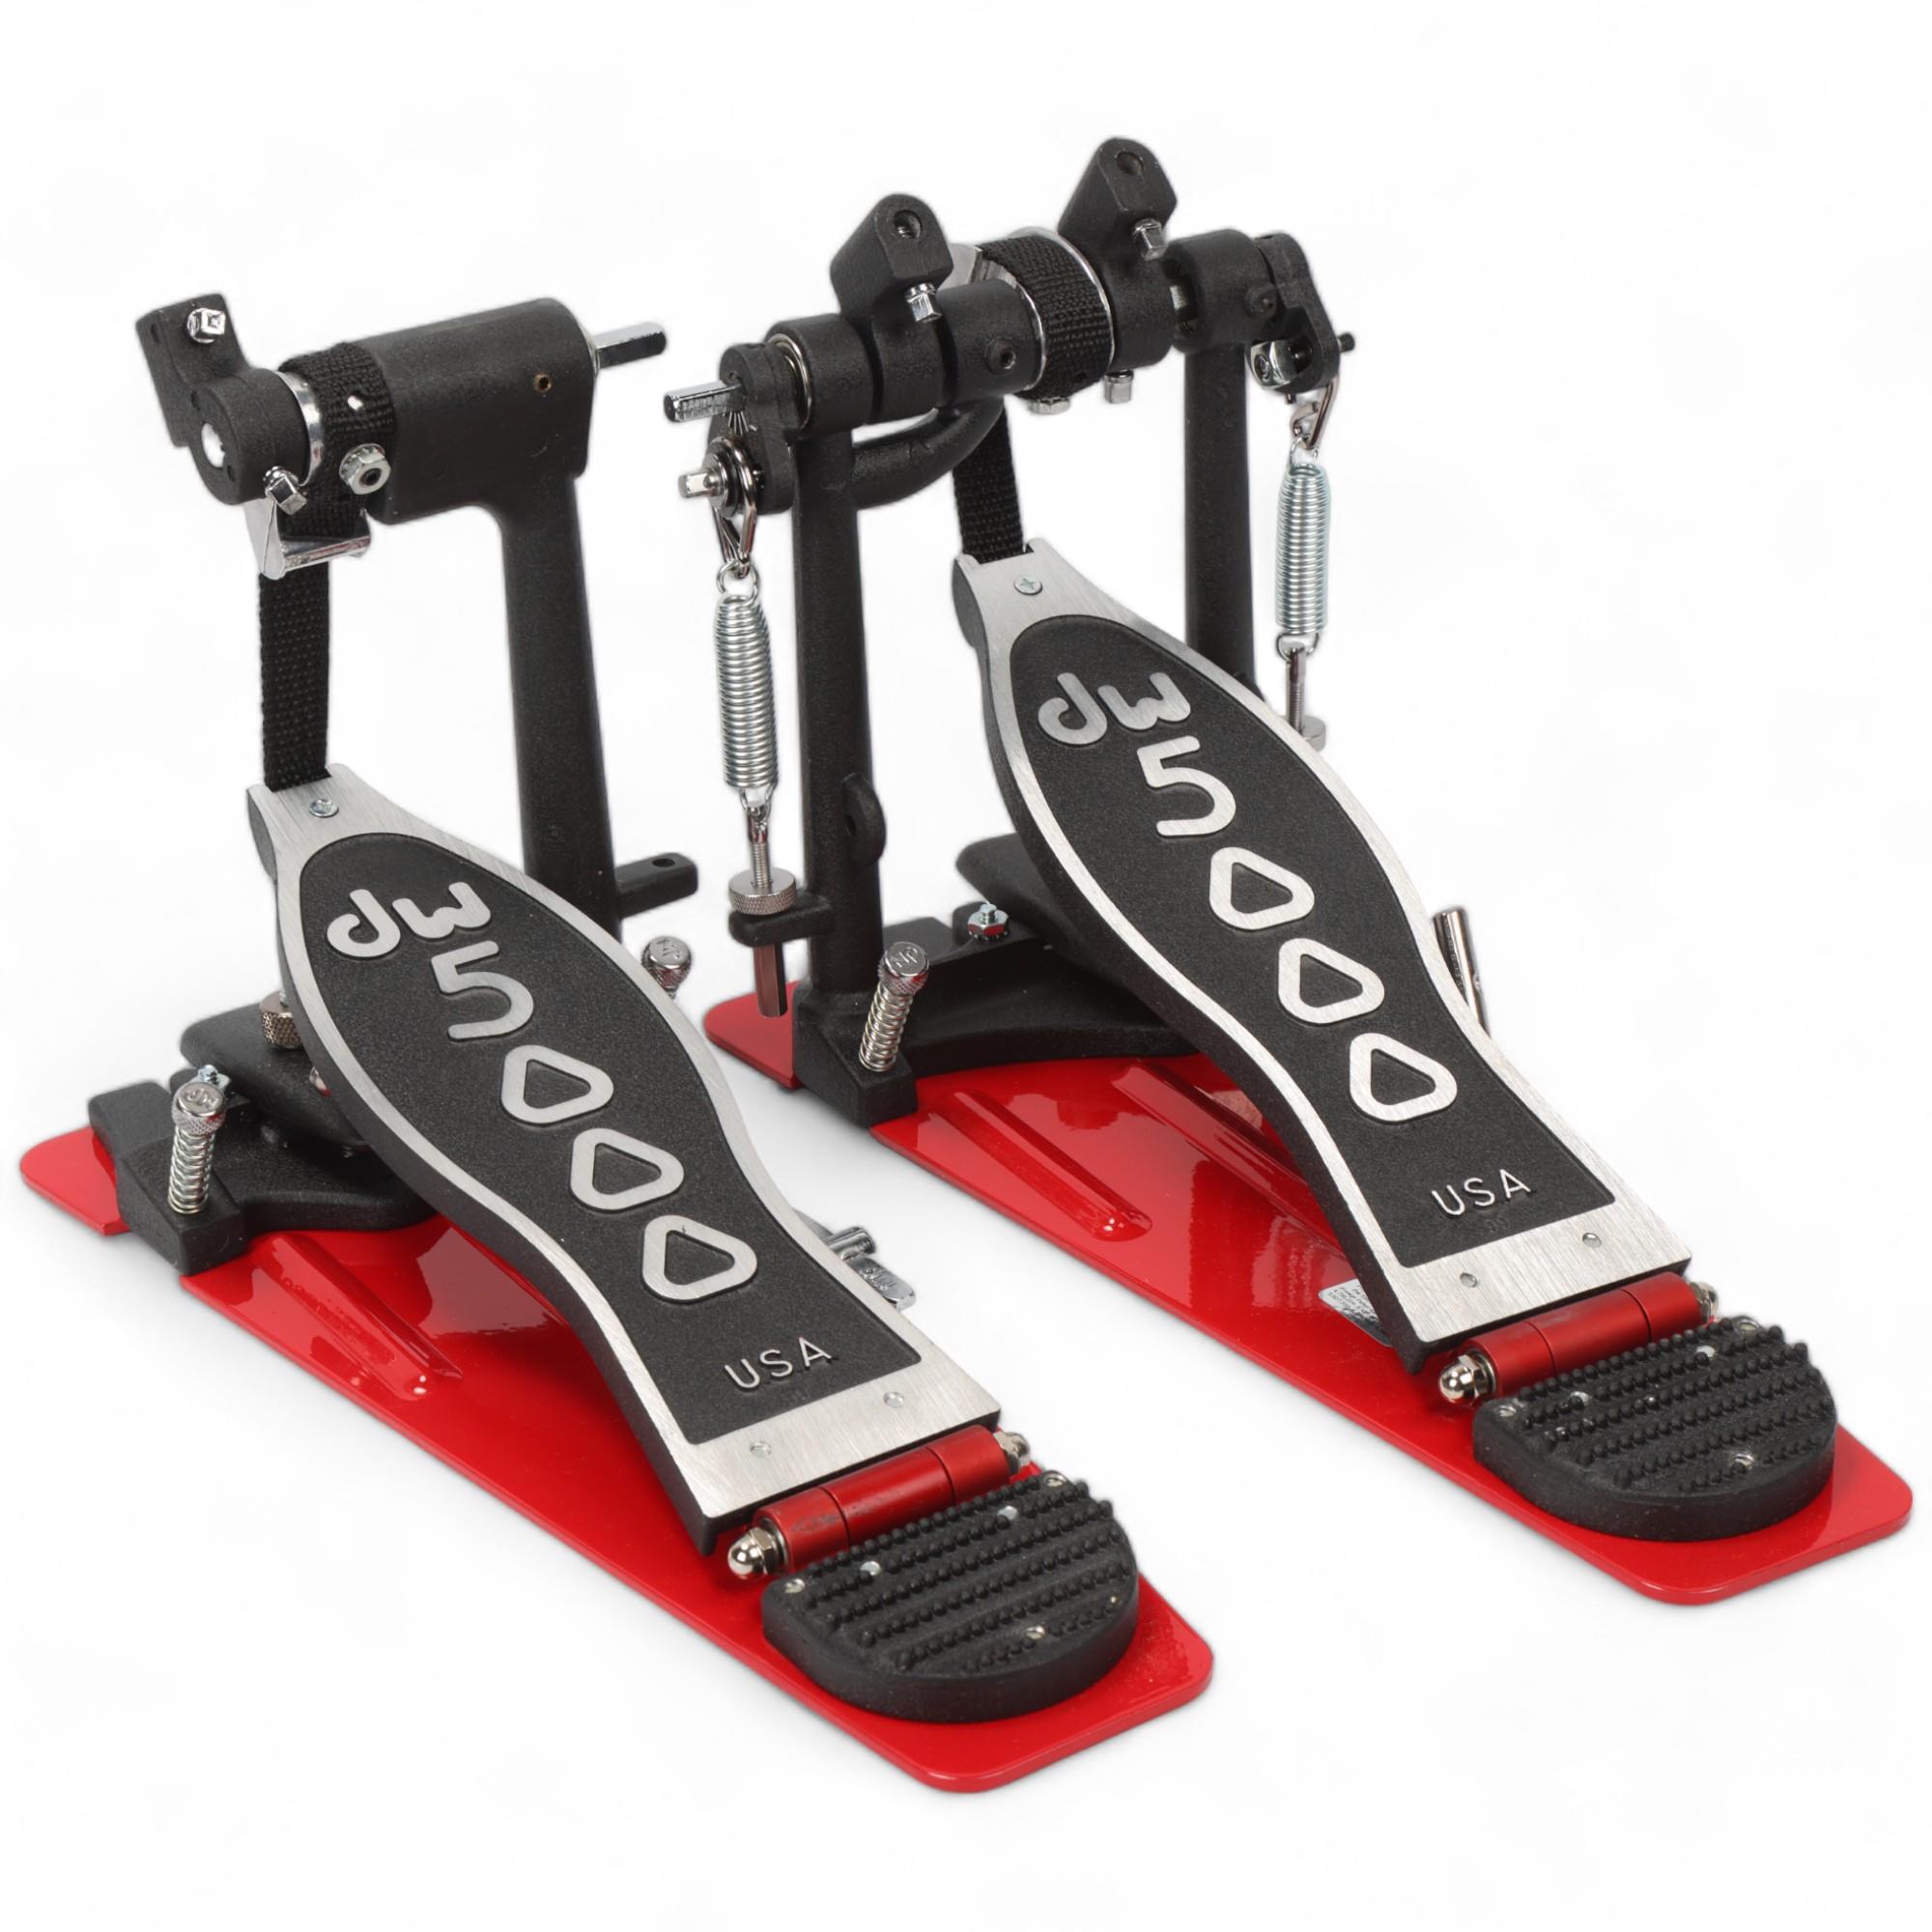 A pair of un-used DW 5000 Bass Drum Pedals MITCH MITCHELL of the JIMI HENDRIX